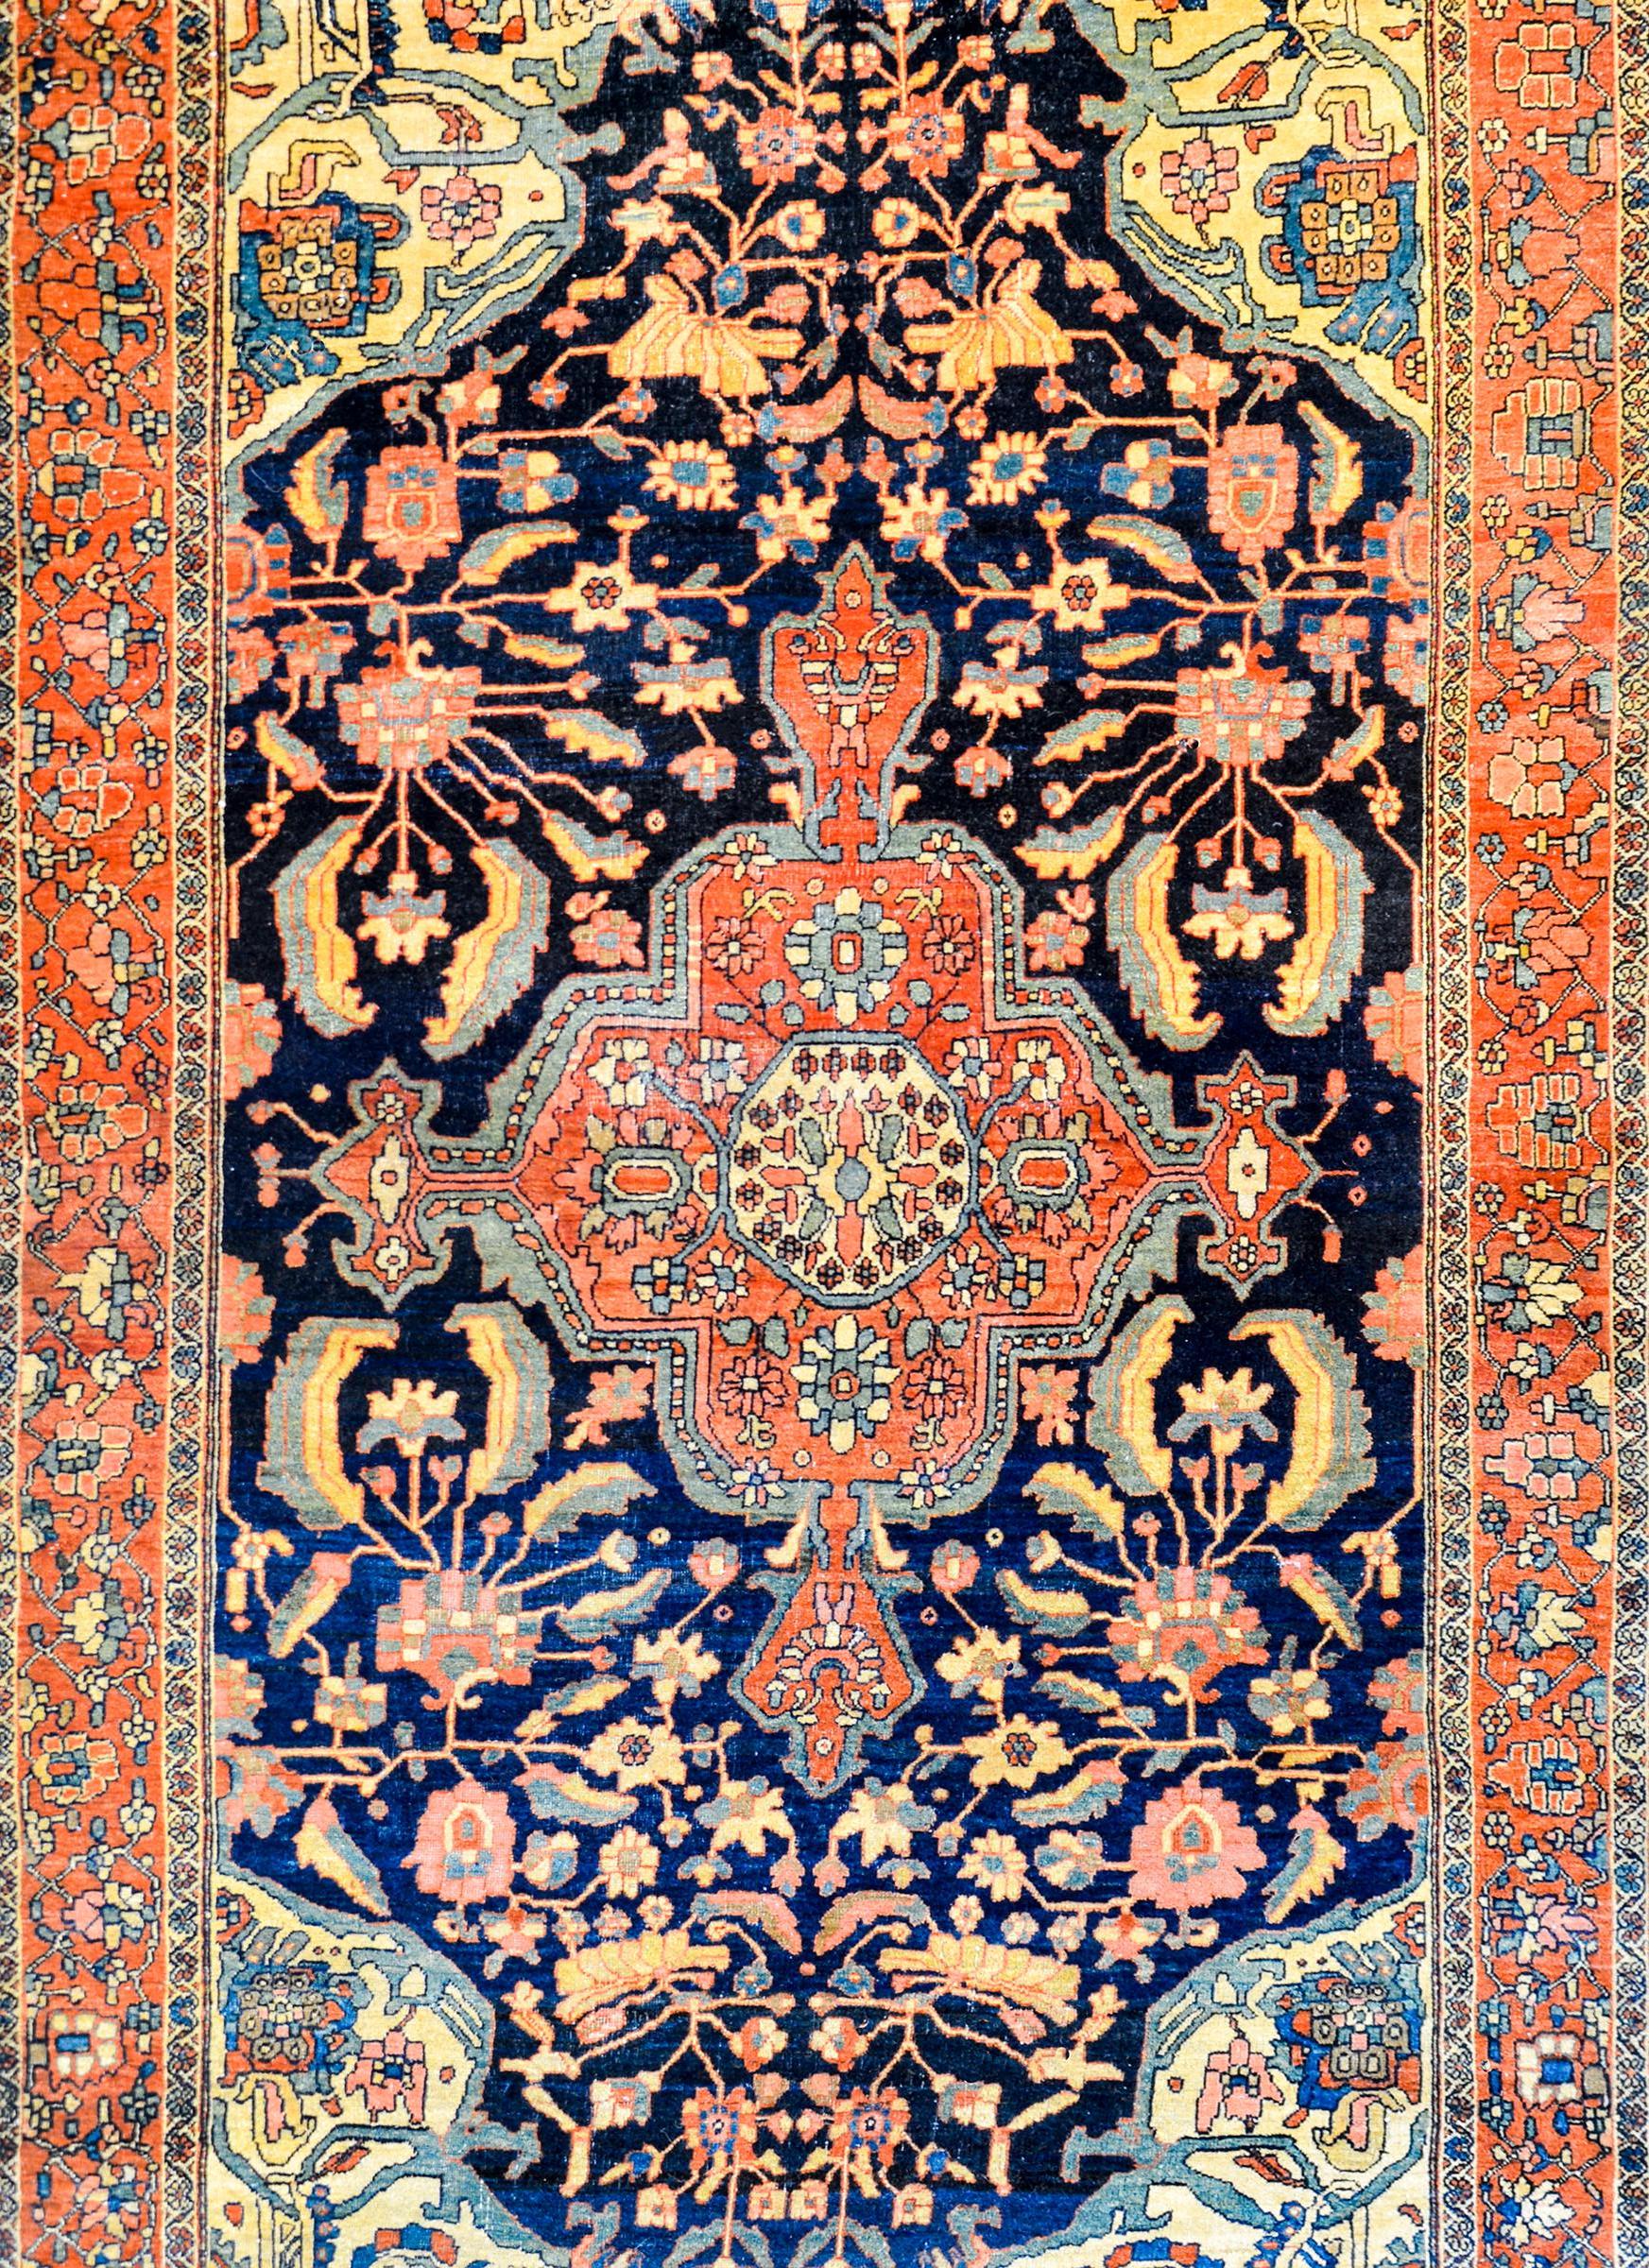 A gorgeous early 20th century Persian Sarouk Farahan rug with a fantastic large scale crimson floral medallion with myriad flowers and scrolling vines on a dark indigo background also with myriad flowers and scrolling vines. The border is wonderful